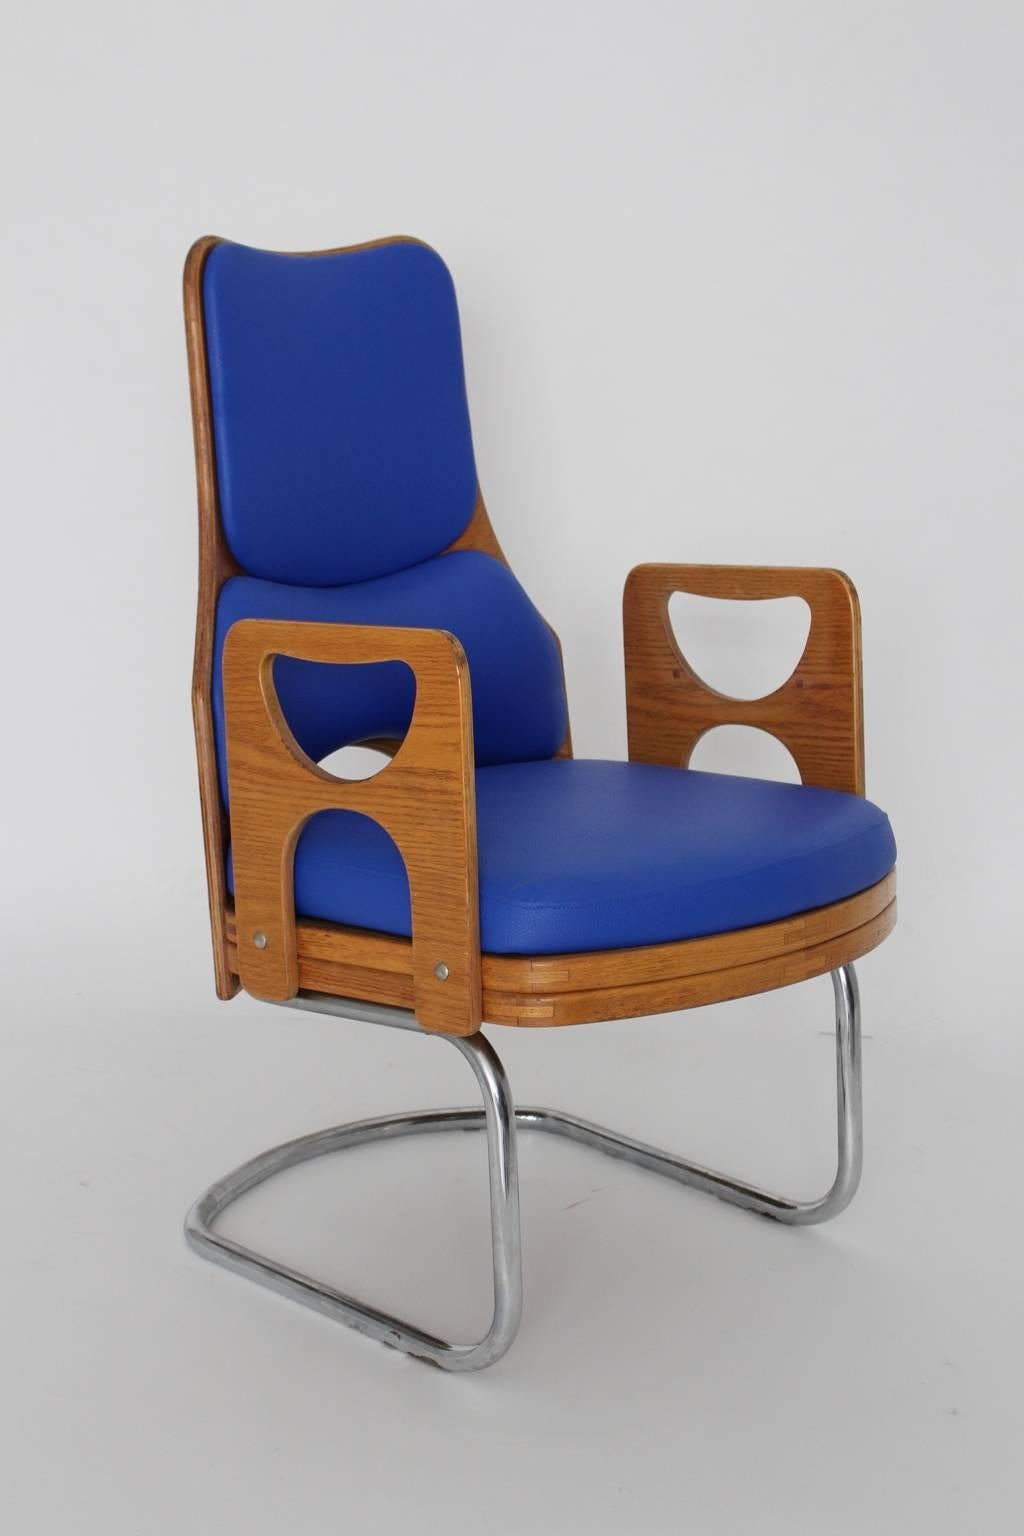 Metal Space Age Blue Vintage Teak Armchair or Lounge Chair 1960s For Sale